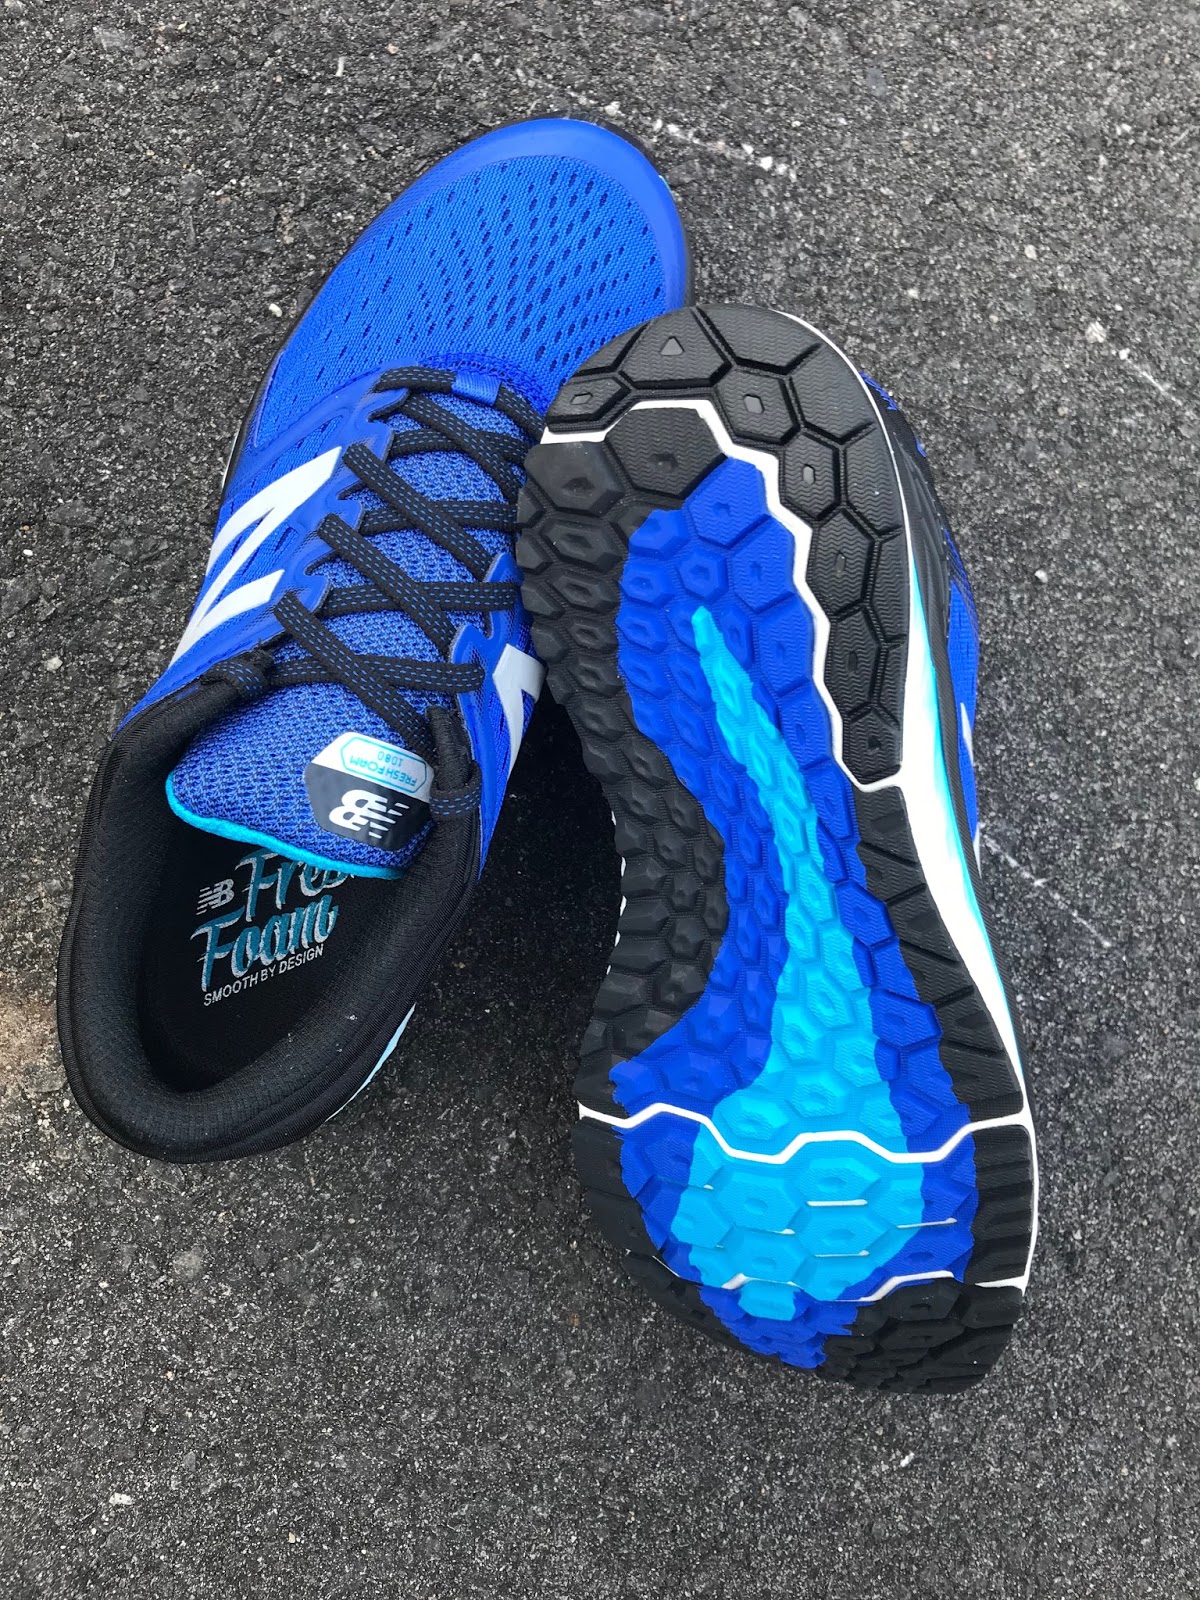 ranura Disponible elevación Road Trail Run: New Balance Fresh Foam 1080v8 Review, with Detailed  Comparisons to Brooks Levitate and Saucony Triumph ISO 4